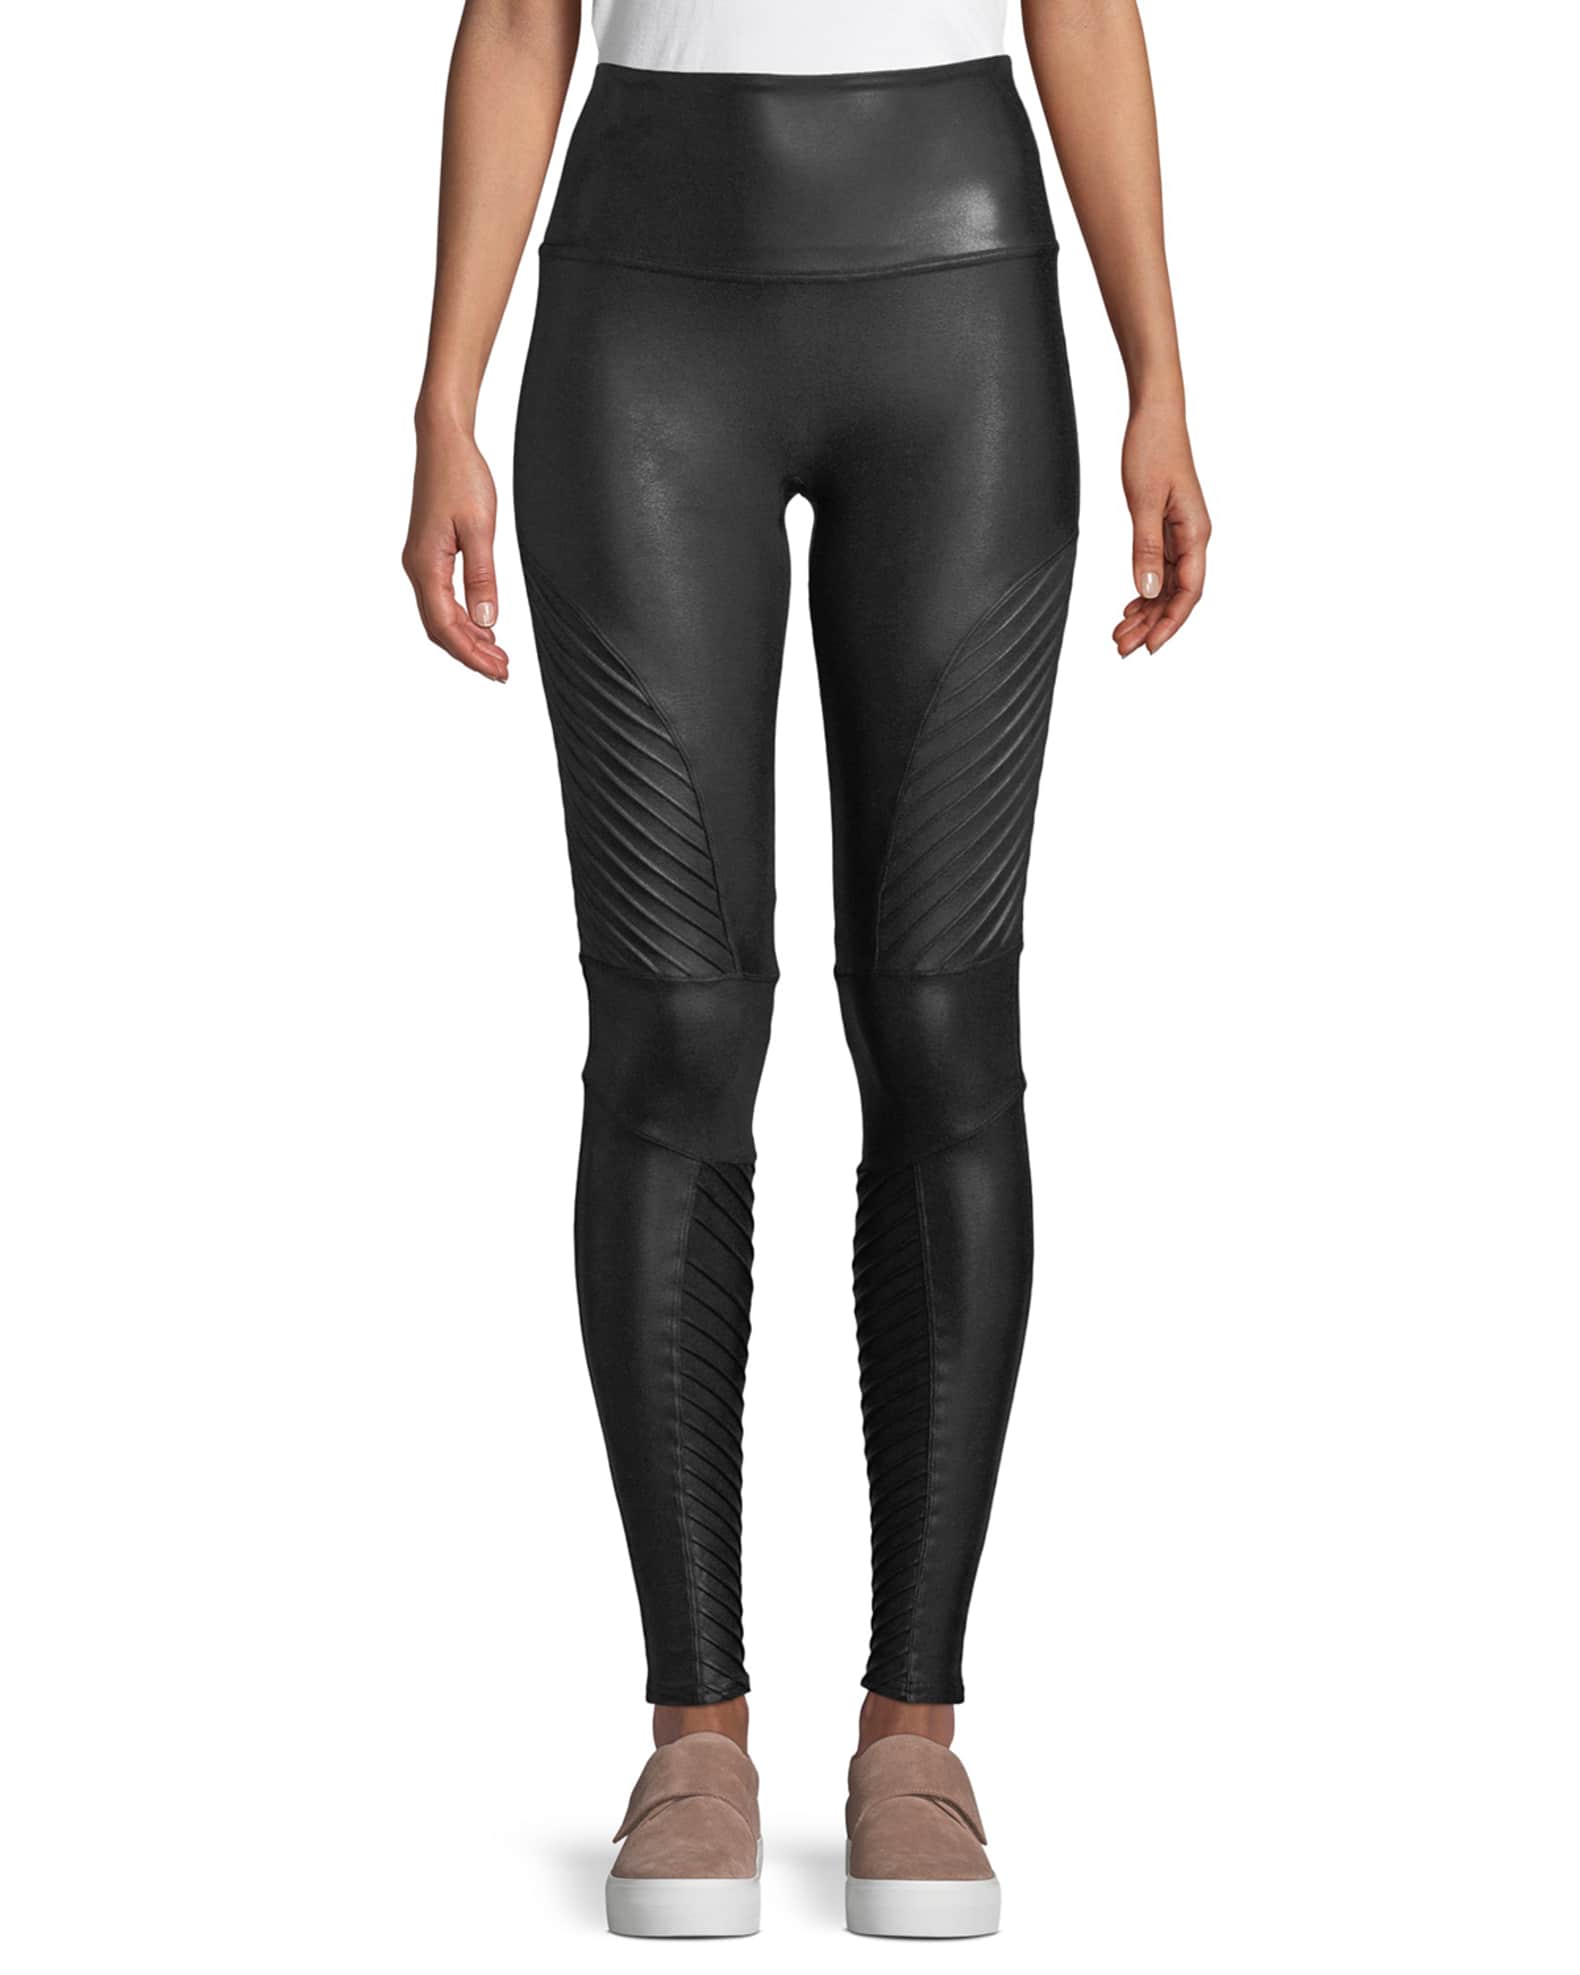 How To Elevate SPANX Faux-Leather Leggings - The Mom Edit